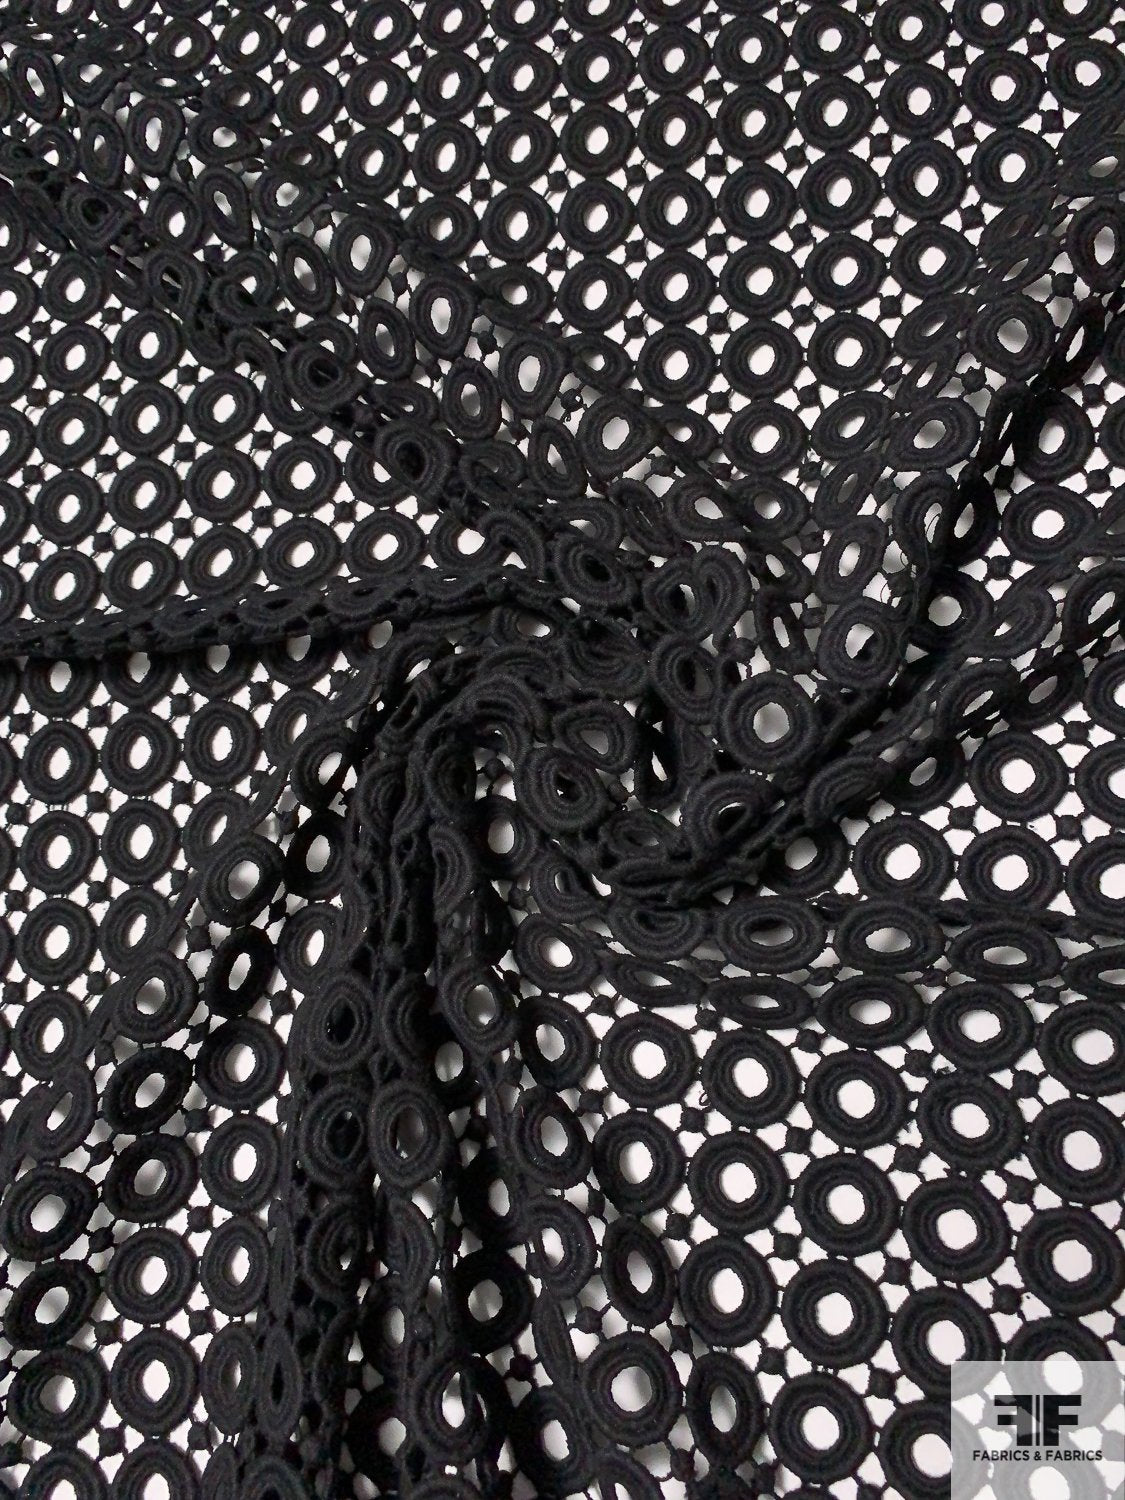 Circular Design Guipure Lace - Black - Fabric by the Yard